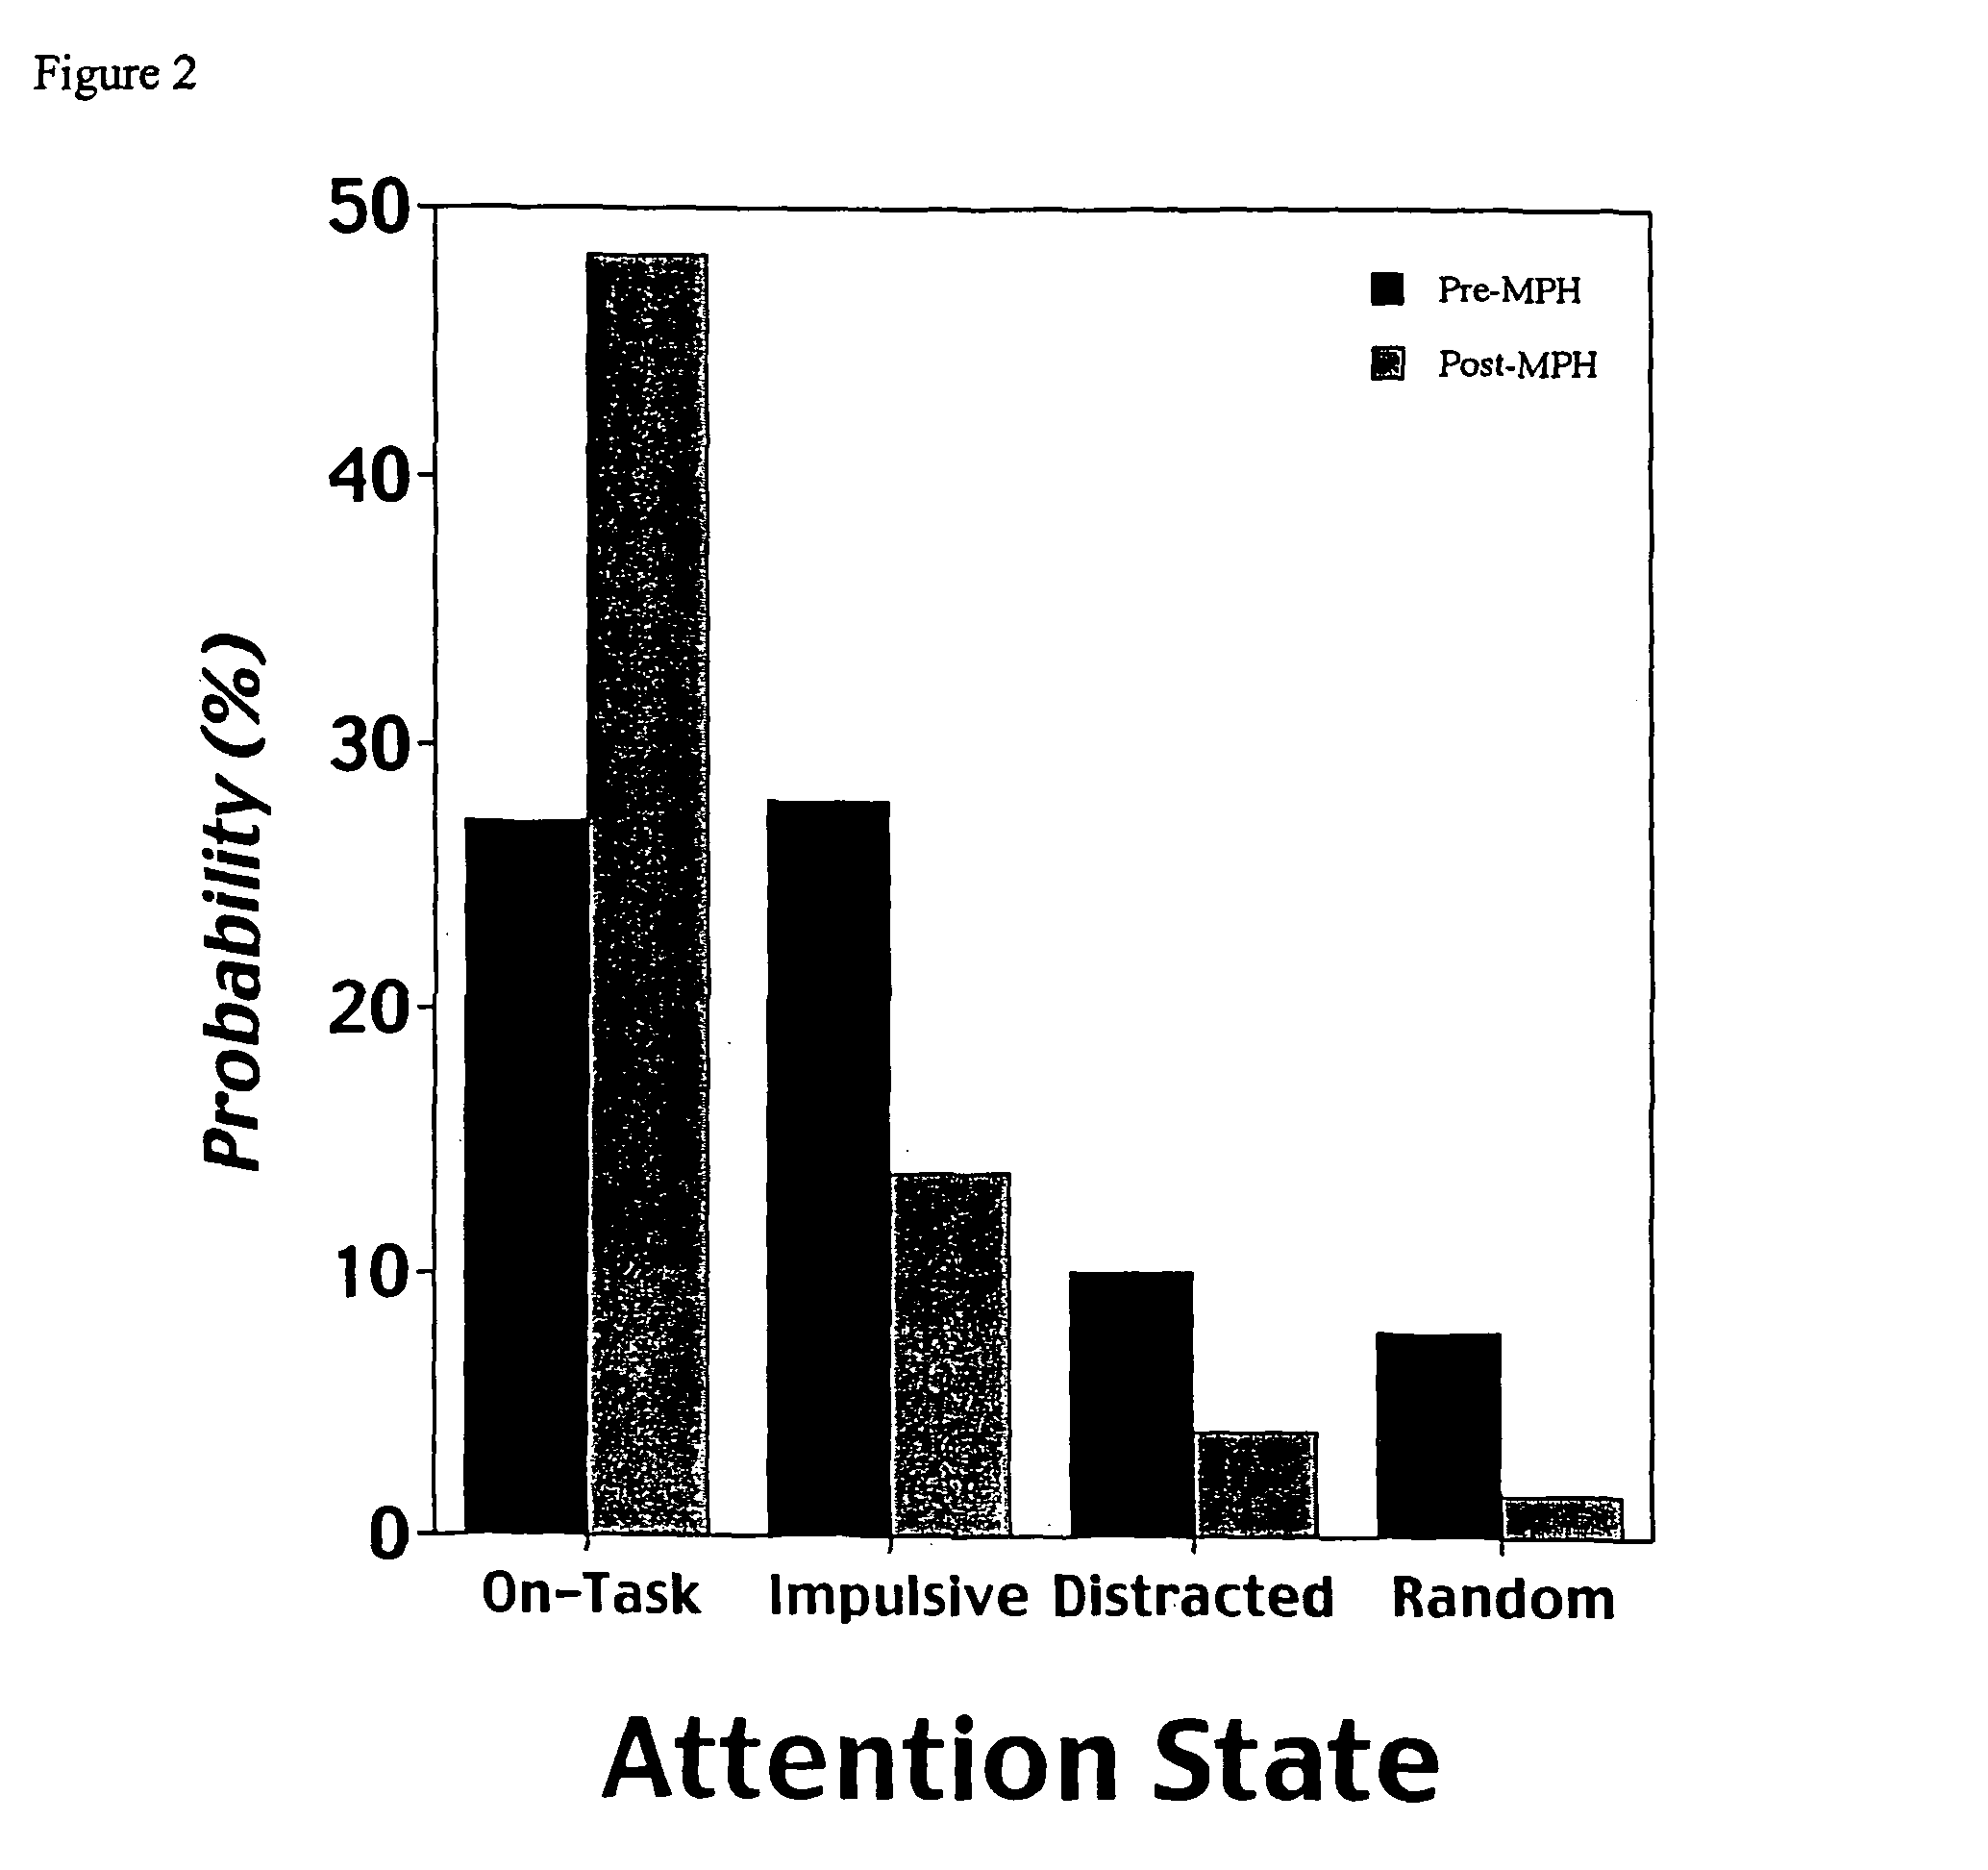 Method for determining fluctuation in attentional state and overall attentional state